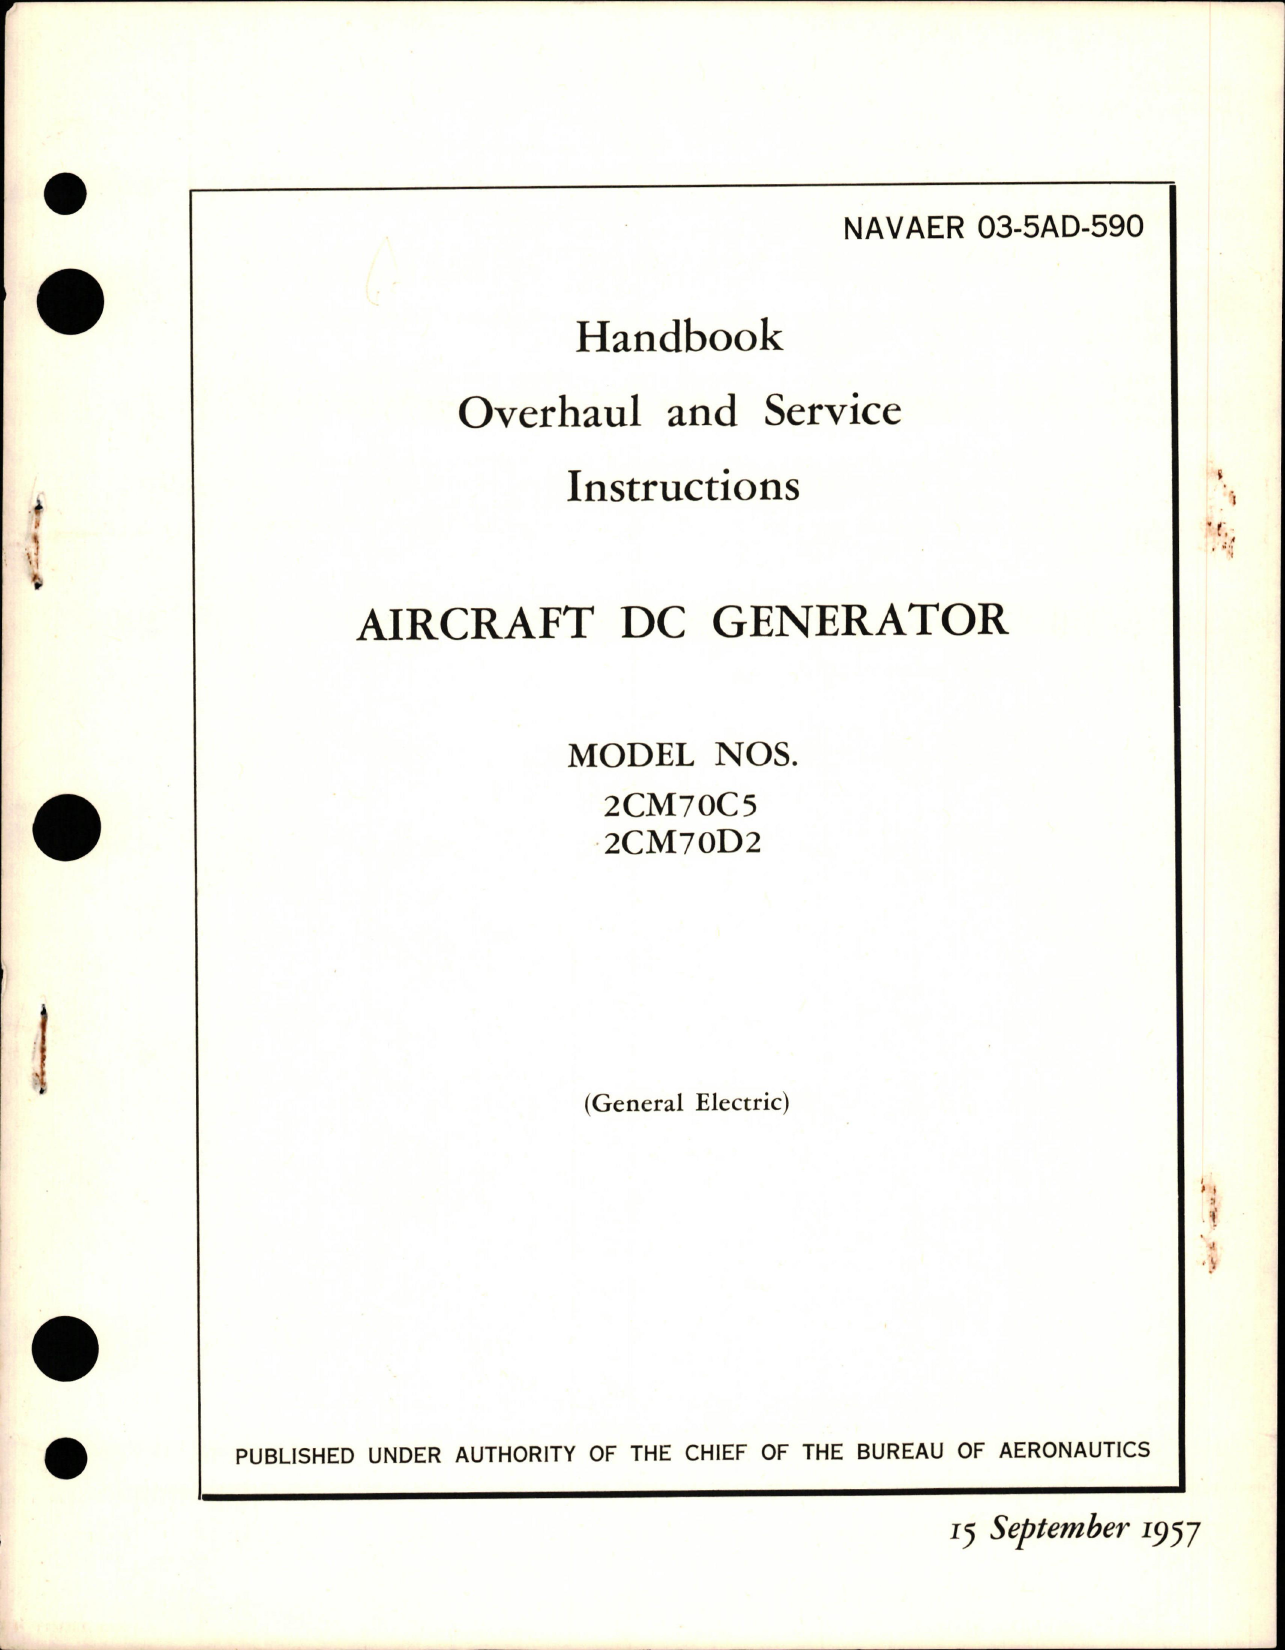 Sample page 1 from AirCorps Library document: Overhaul and Service Instructions for Aircraft DC Generator - Models 2CM70C5 and 2CM70D2 